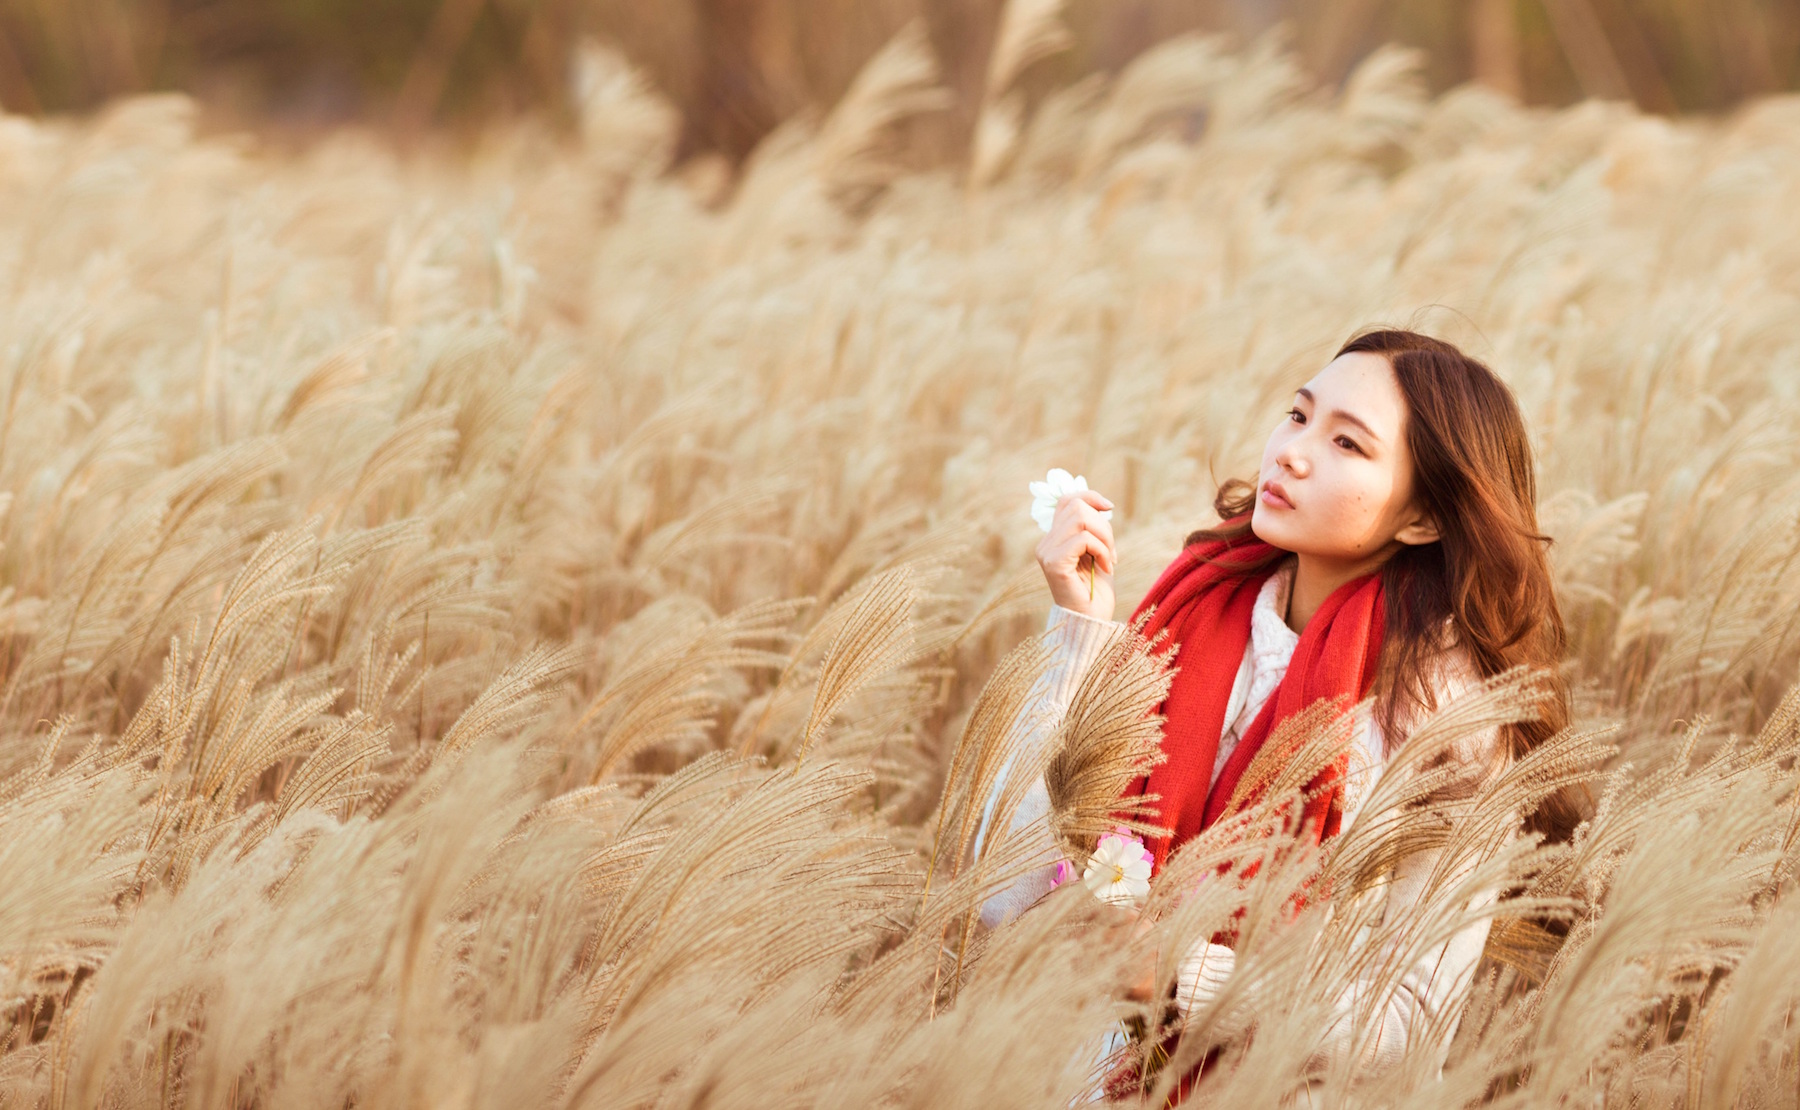 Woman alone deep in thought in a field of wheat, wearing a bright red scarf. 